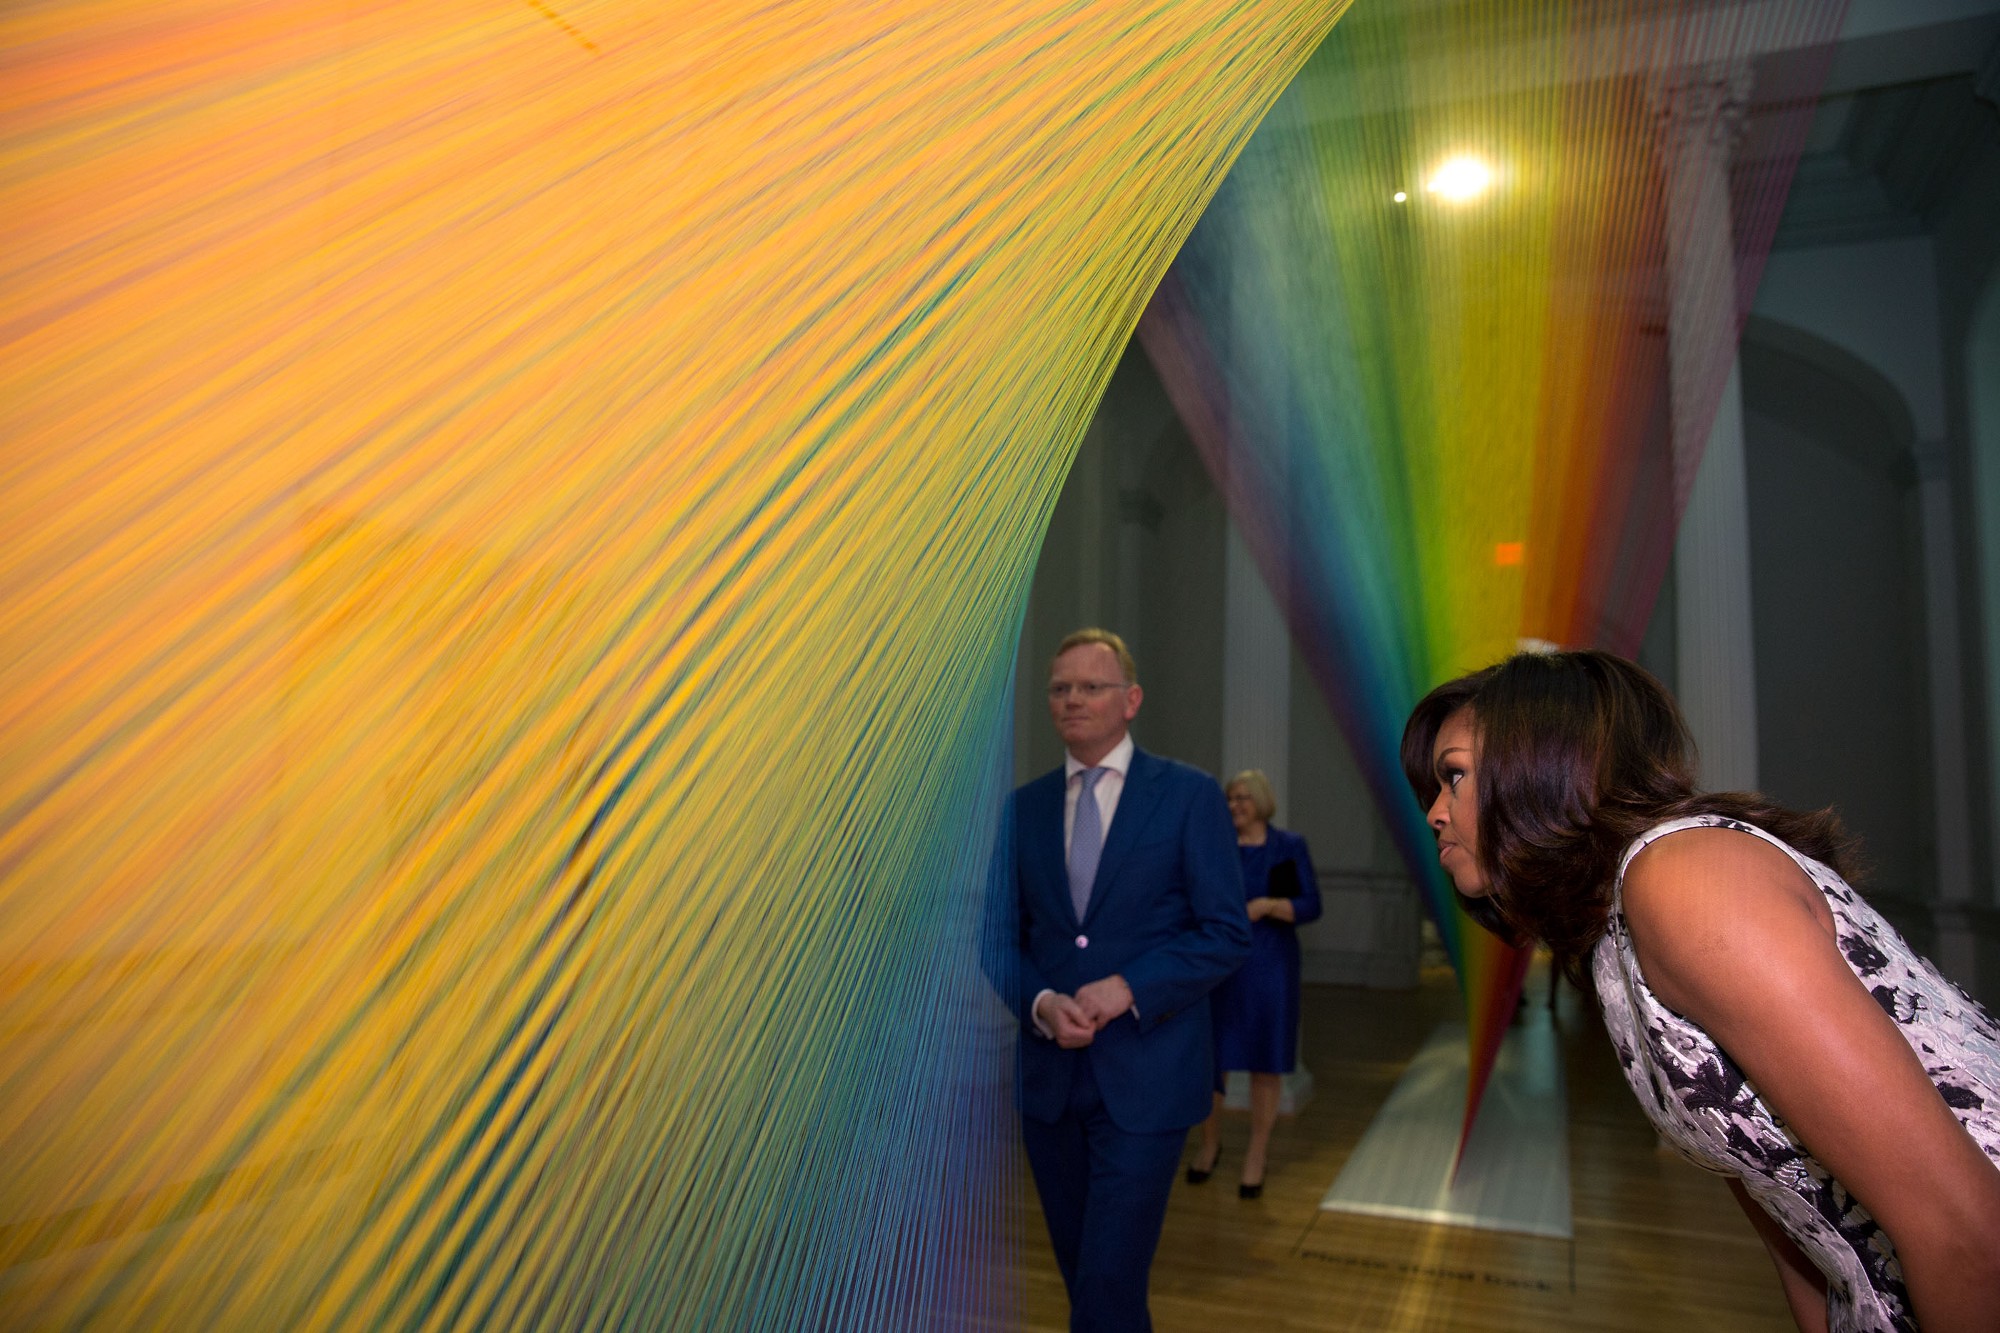 Mrs. Obama and Mr. Sindre Finnes of Norway look at an exhibit during a tour of the Renwick Gallery with Nordic leaders’ spouses. (Official White House Photo by Amanda Lucidon)